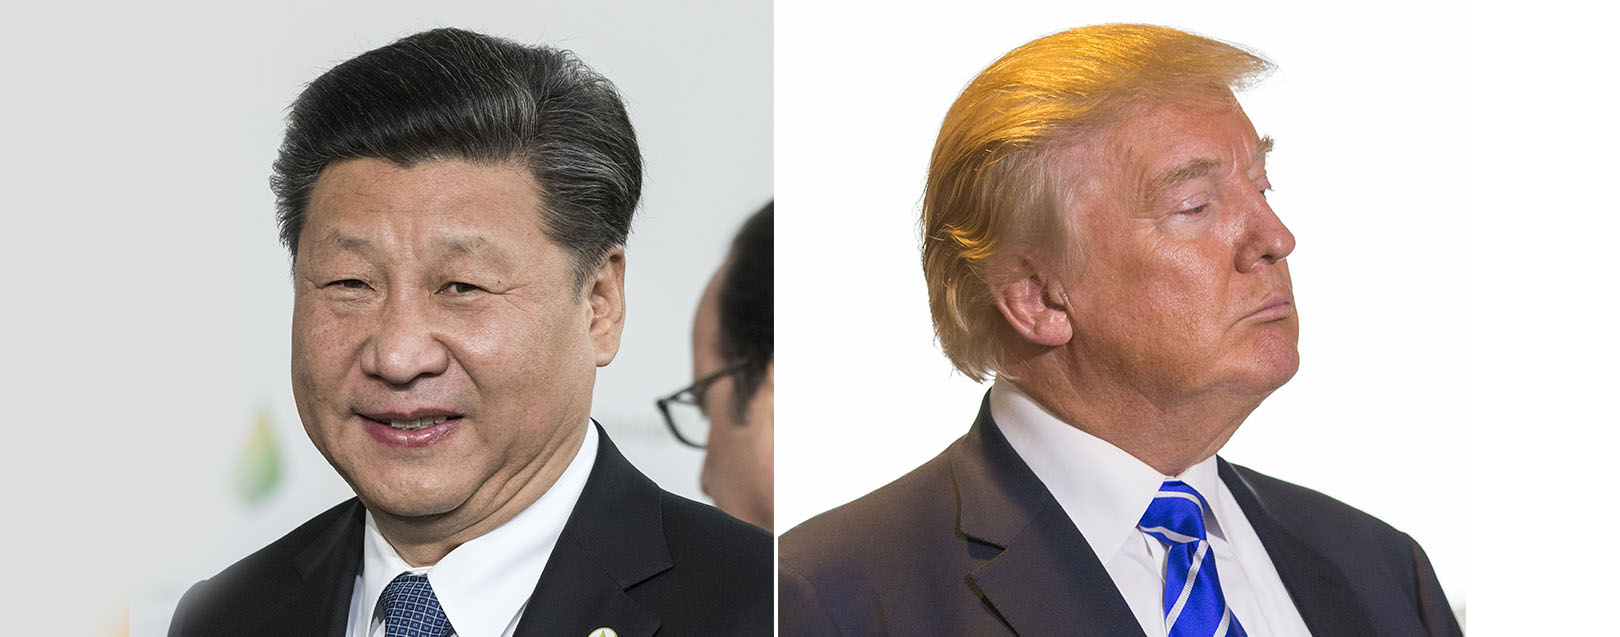 Xi reiterates on bilateral cooperation in his phone call to Trump